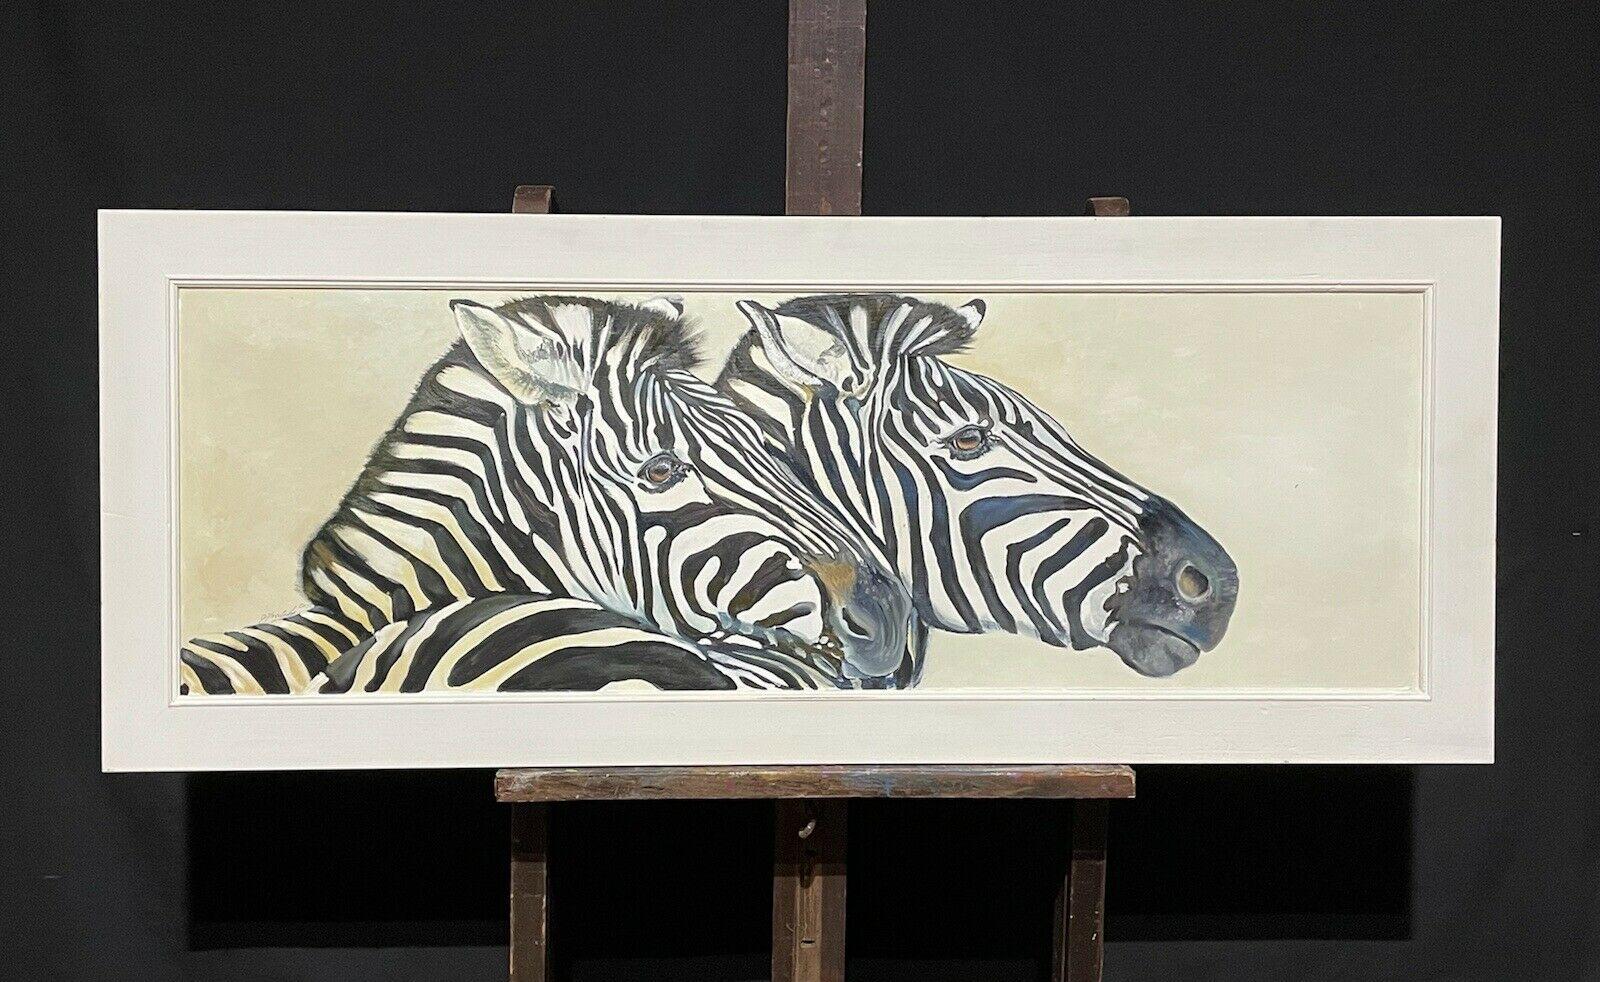 HUGE OIL PAINTING OF TWO ZEBRAS - BY CLIVE FREDRIKSSON - FRAMED & STUNNING - Painting by Clive Fredriksson